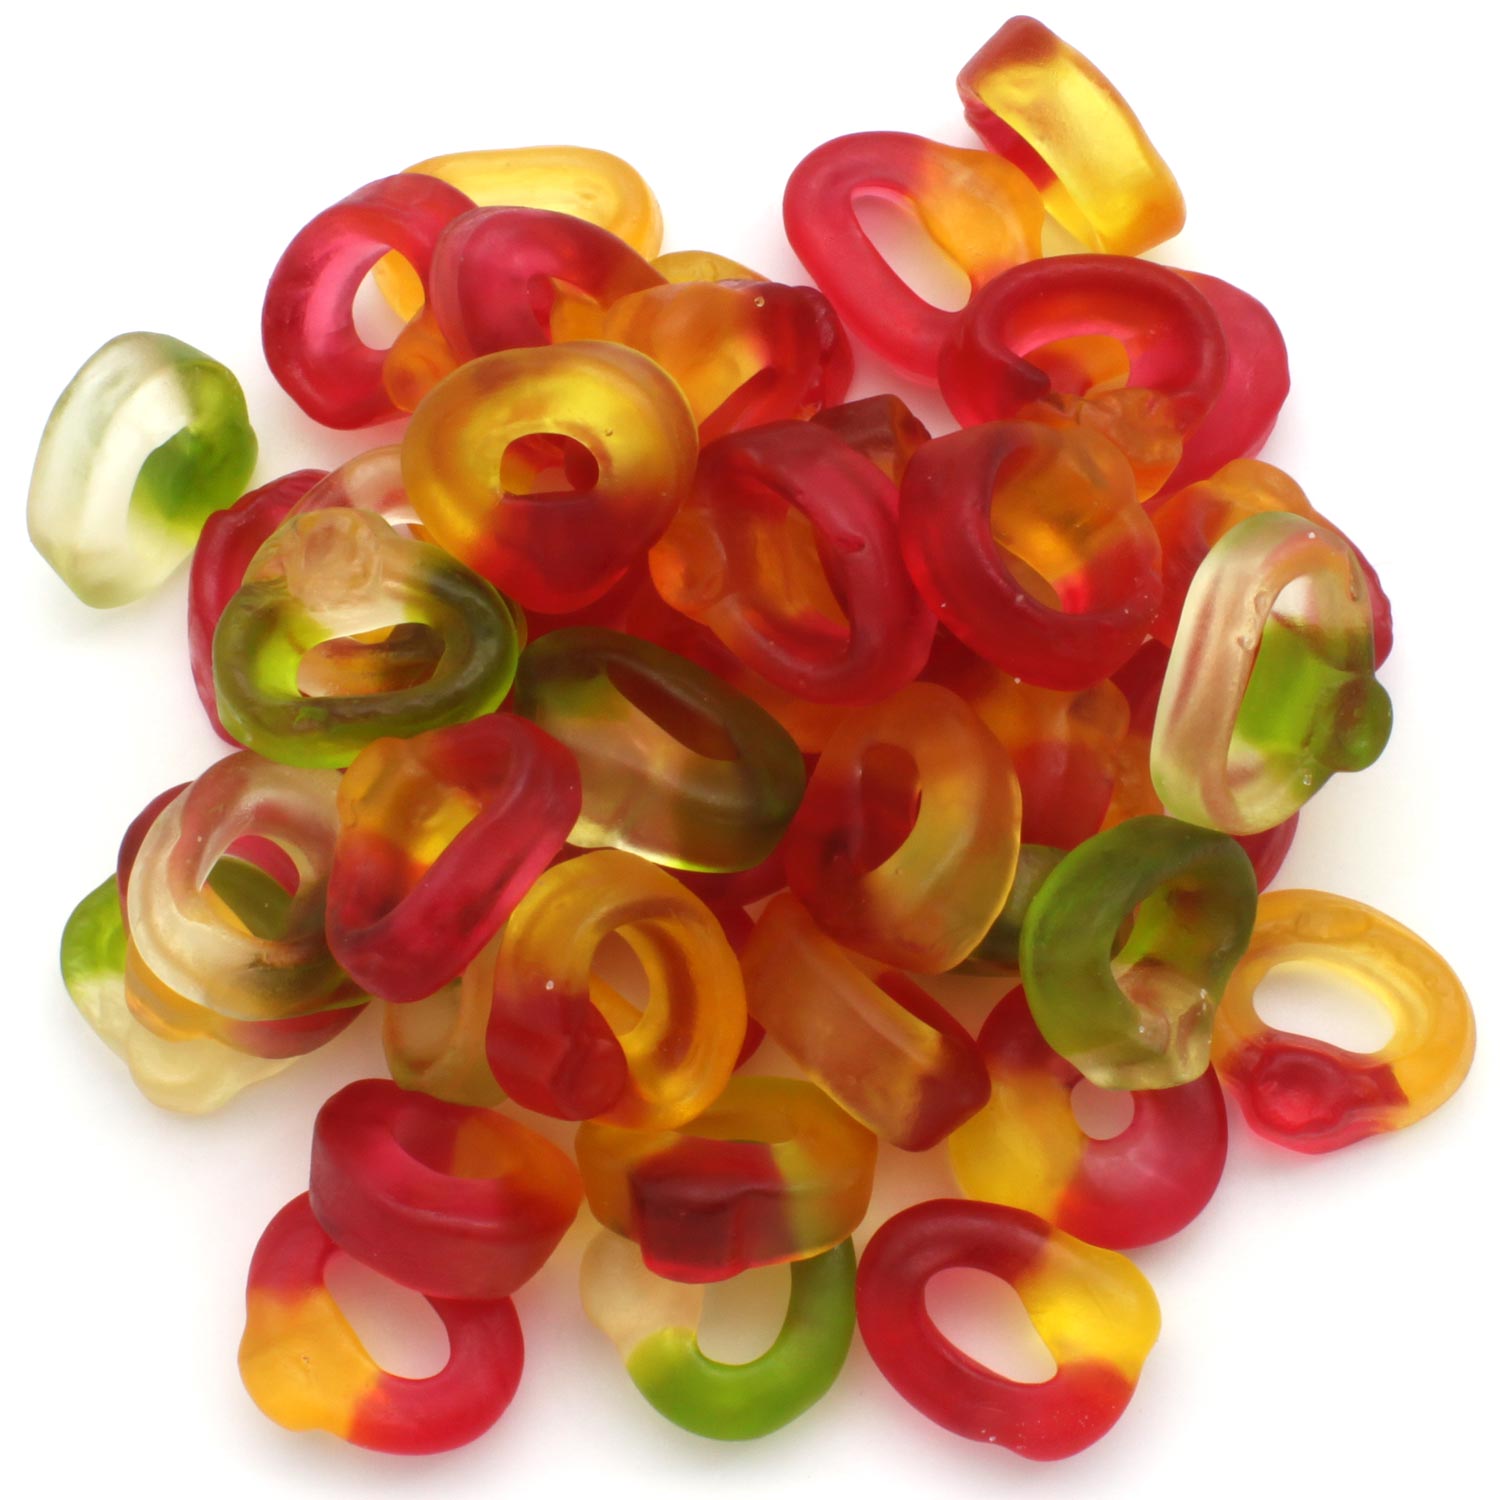 HARIBO Releases New Flavors, Limited Edition Shapes for 100th Birthday of  Iconic Goldbears Gummies